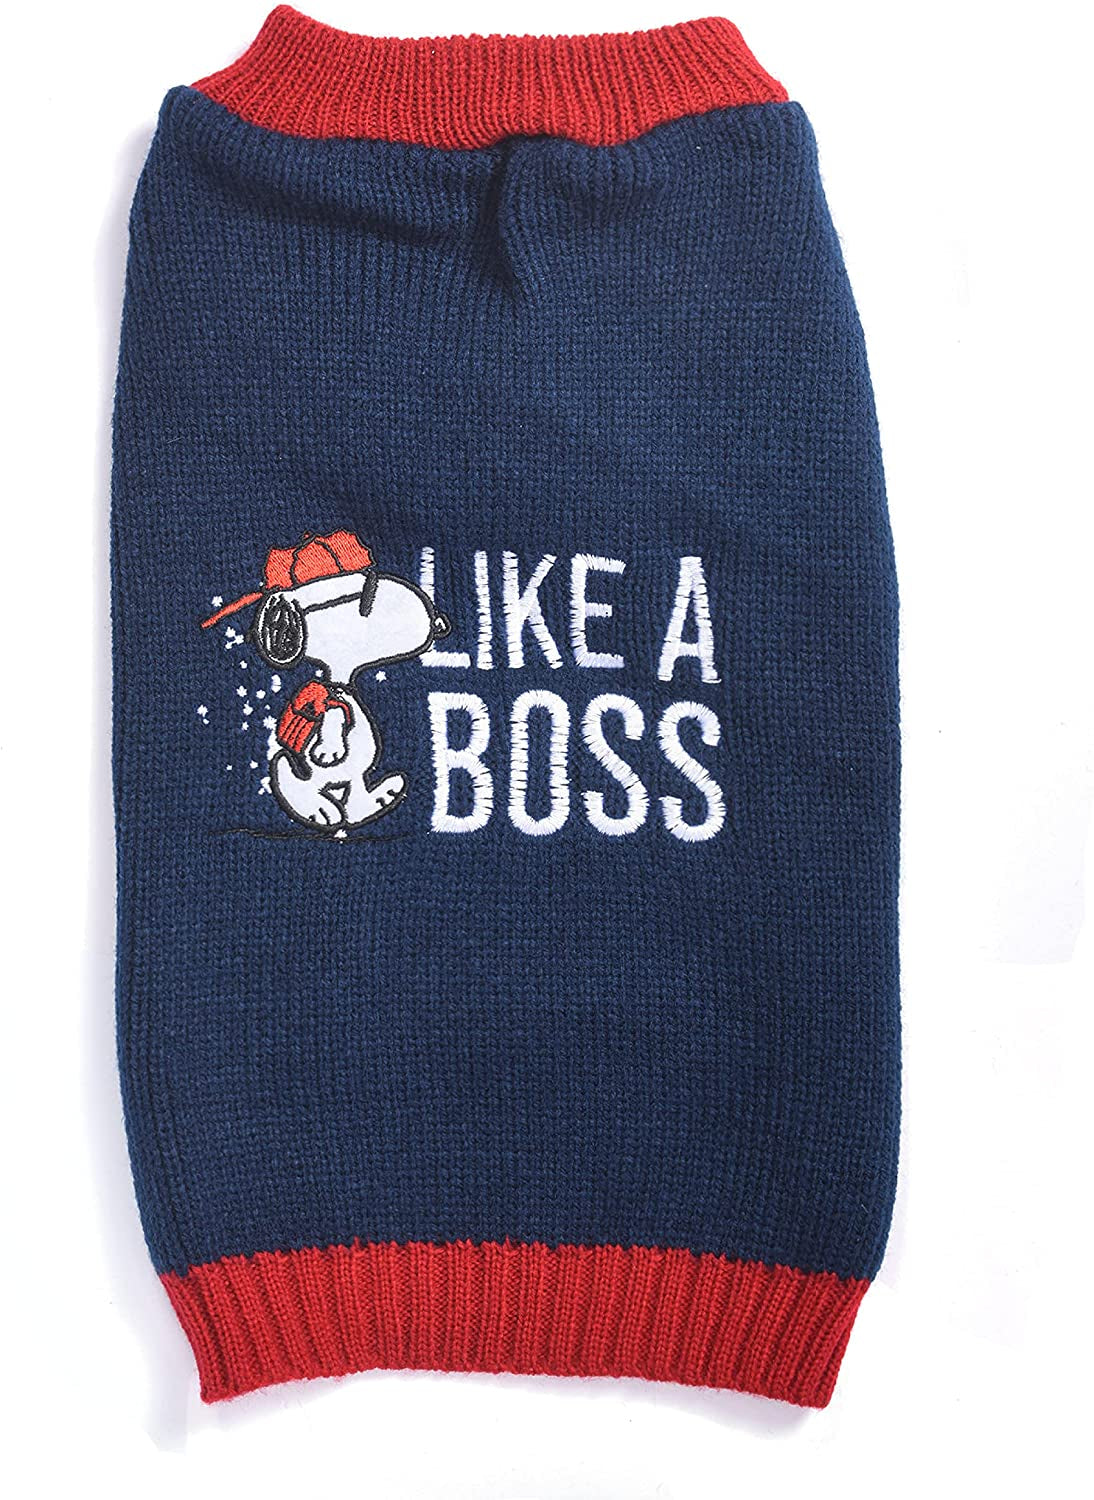 Peanuts for Pets Snoopy "Like a Boss" Dog Sweater, Medium | Soft and Comfortable Dog Apparel Dog Clothing Dog Shirt | Peanuts Snoopy Medium Dog Sweater, Medium Dog Shirt for Medium Dogs